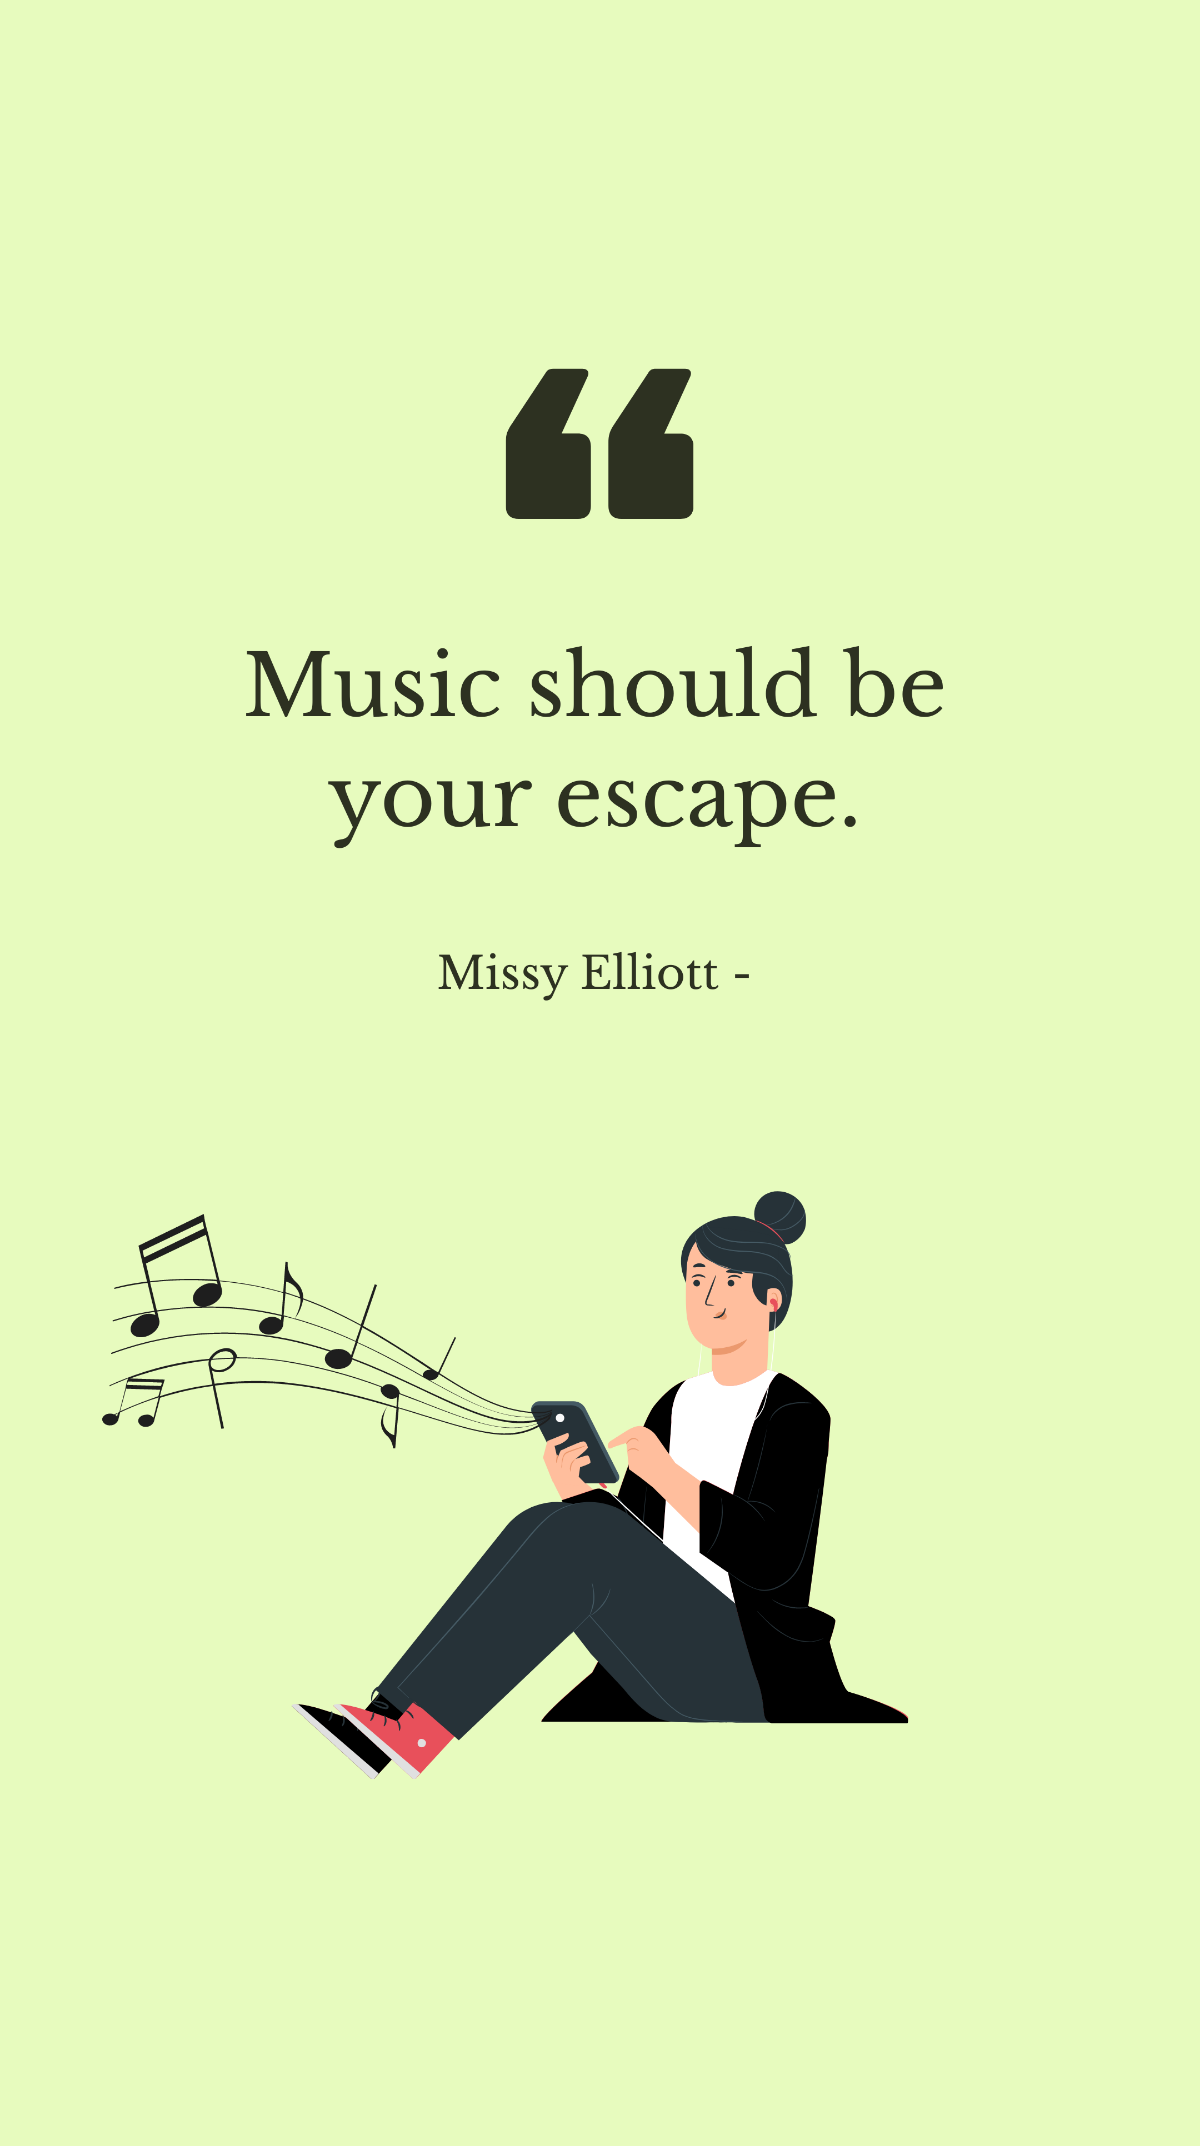 Missy Elliott - Music should be your escape.